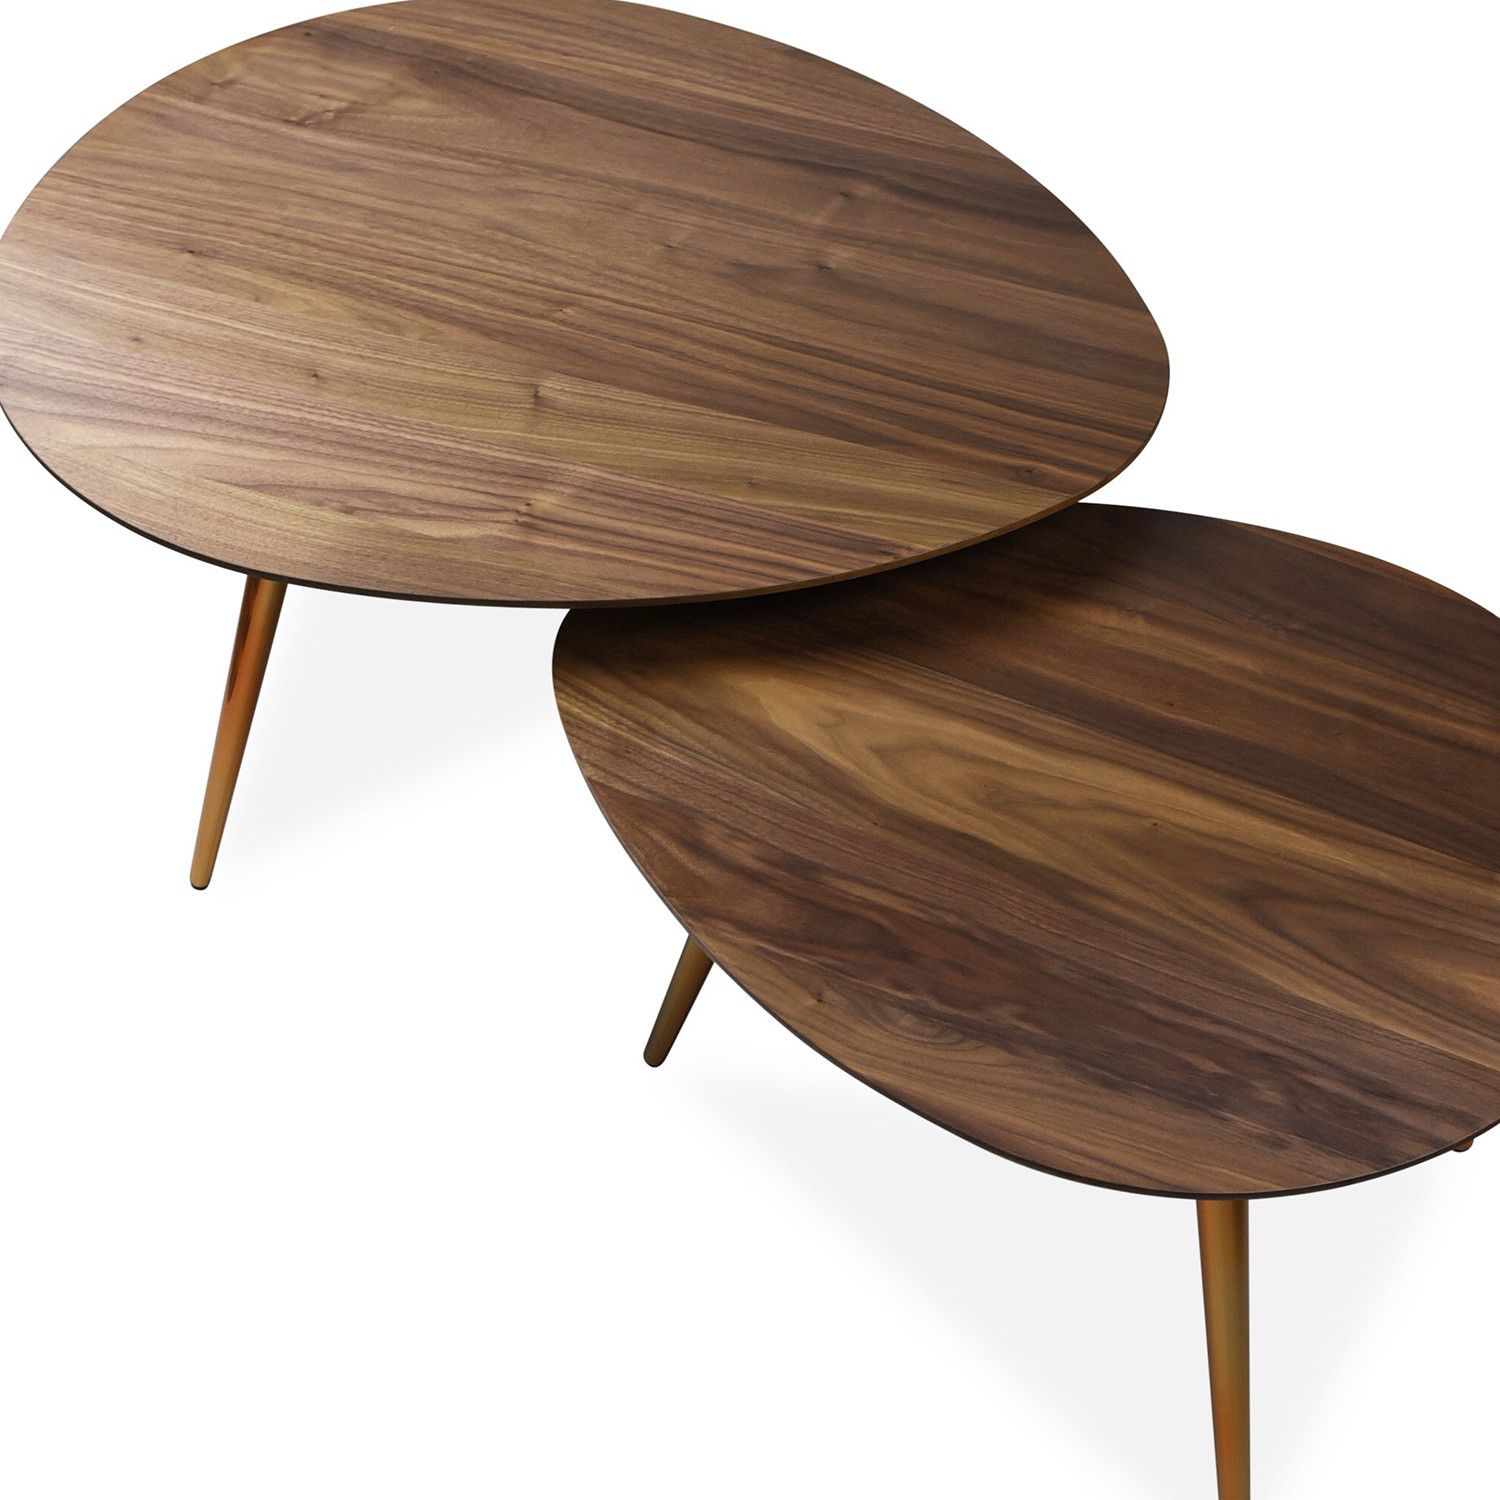 Maddox Mid Century Modern Nesting Coffee Table Set – Edloe Finch Intended For Mid Century Modern Coffee Tables (Gallery 8 of 20)